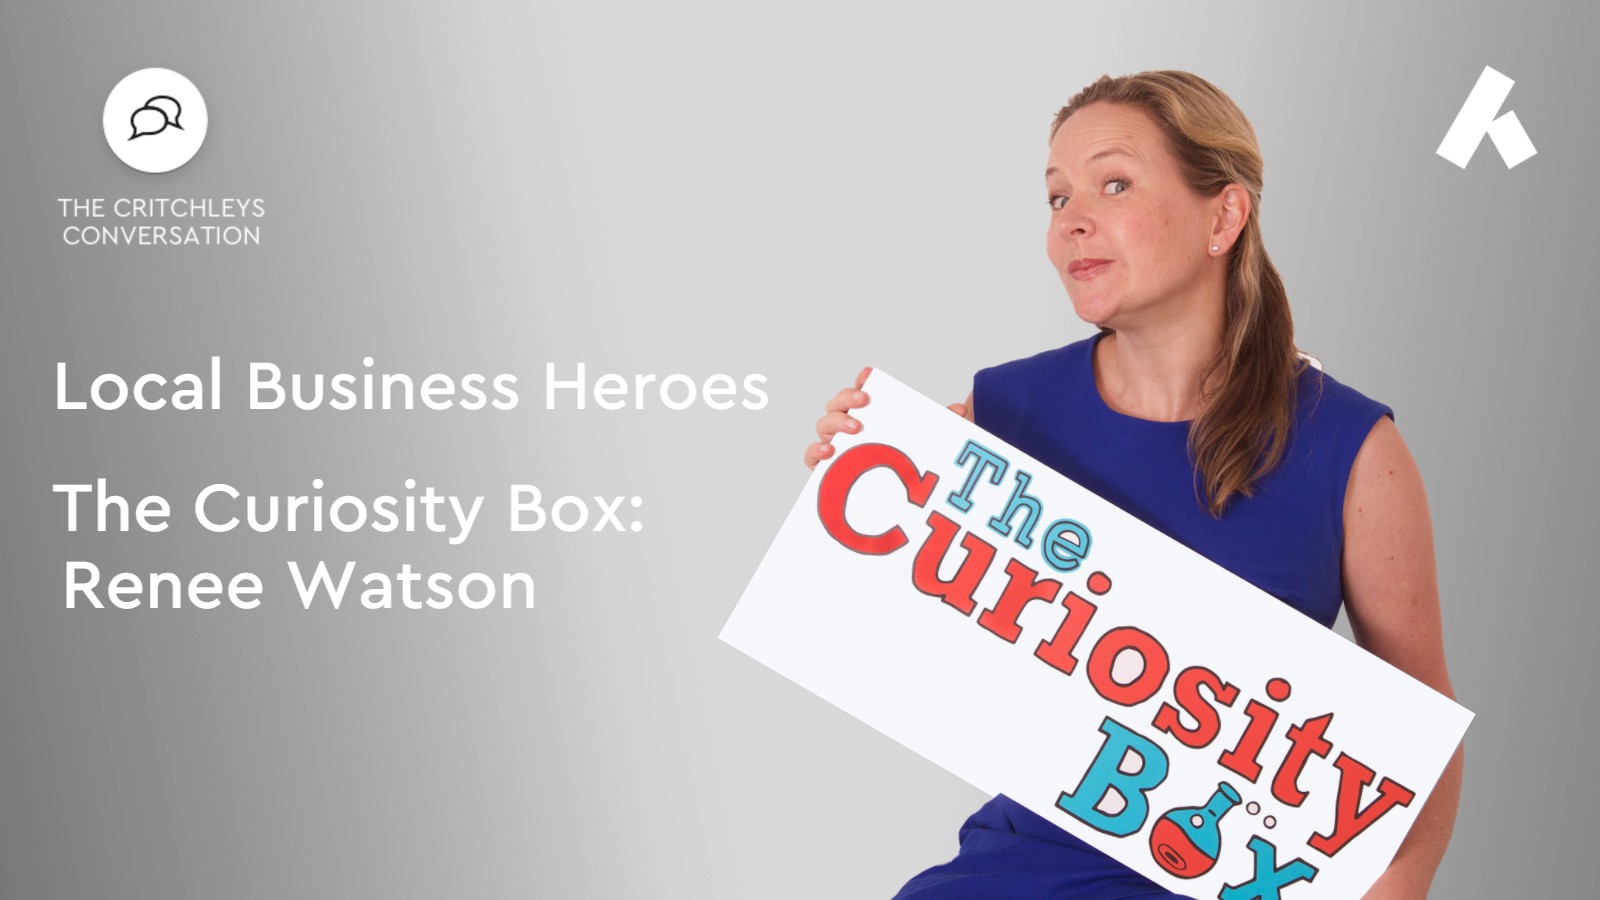 Local Business Heroes: Renee Watson from The Curiosity Box